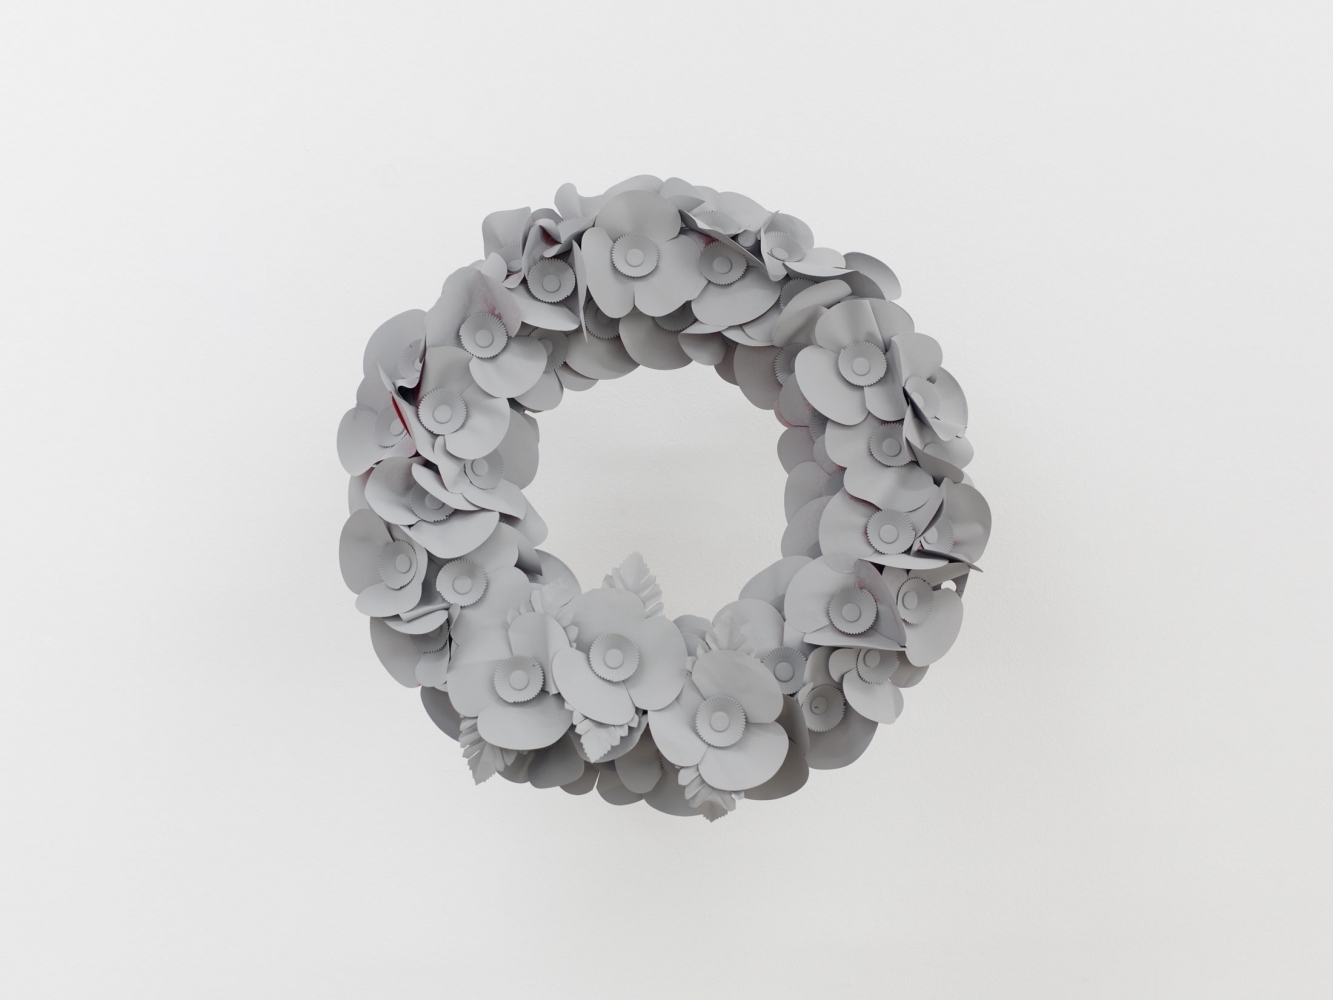 Camilla Wills
Anti-imperial Monochromes, 2021
Five Royal British Legion poppy wreaths, signal grey paint
Each: 15 3/4 x 15 3/4 x 12 5/8 inches (40 x 40 x 32 cm)
&amp;copy; Camilla Wills; Courtesy of the artist, d&amp;eacute;pendance, Brussels, and Luhring Augustine, New York.
Photo&amp;nbsp;by Kristien Daem.